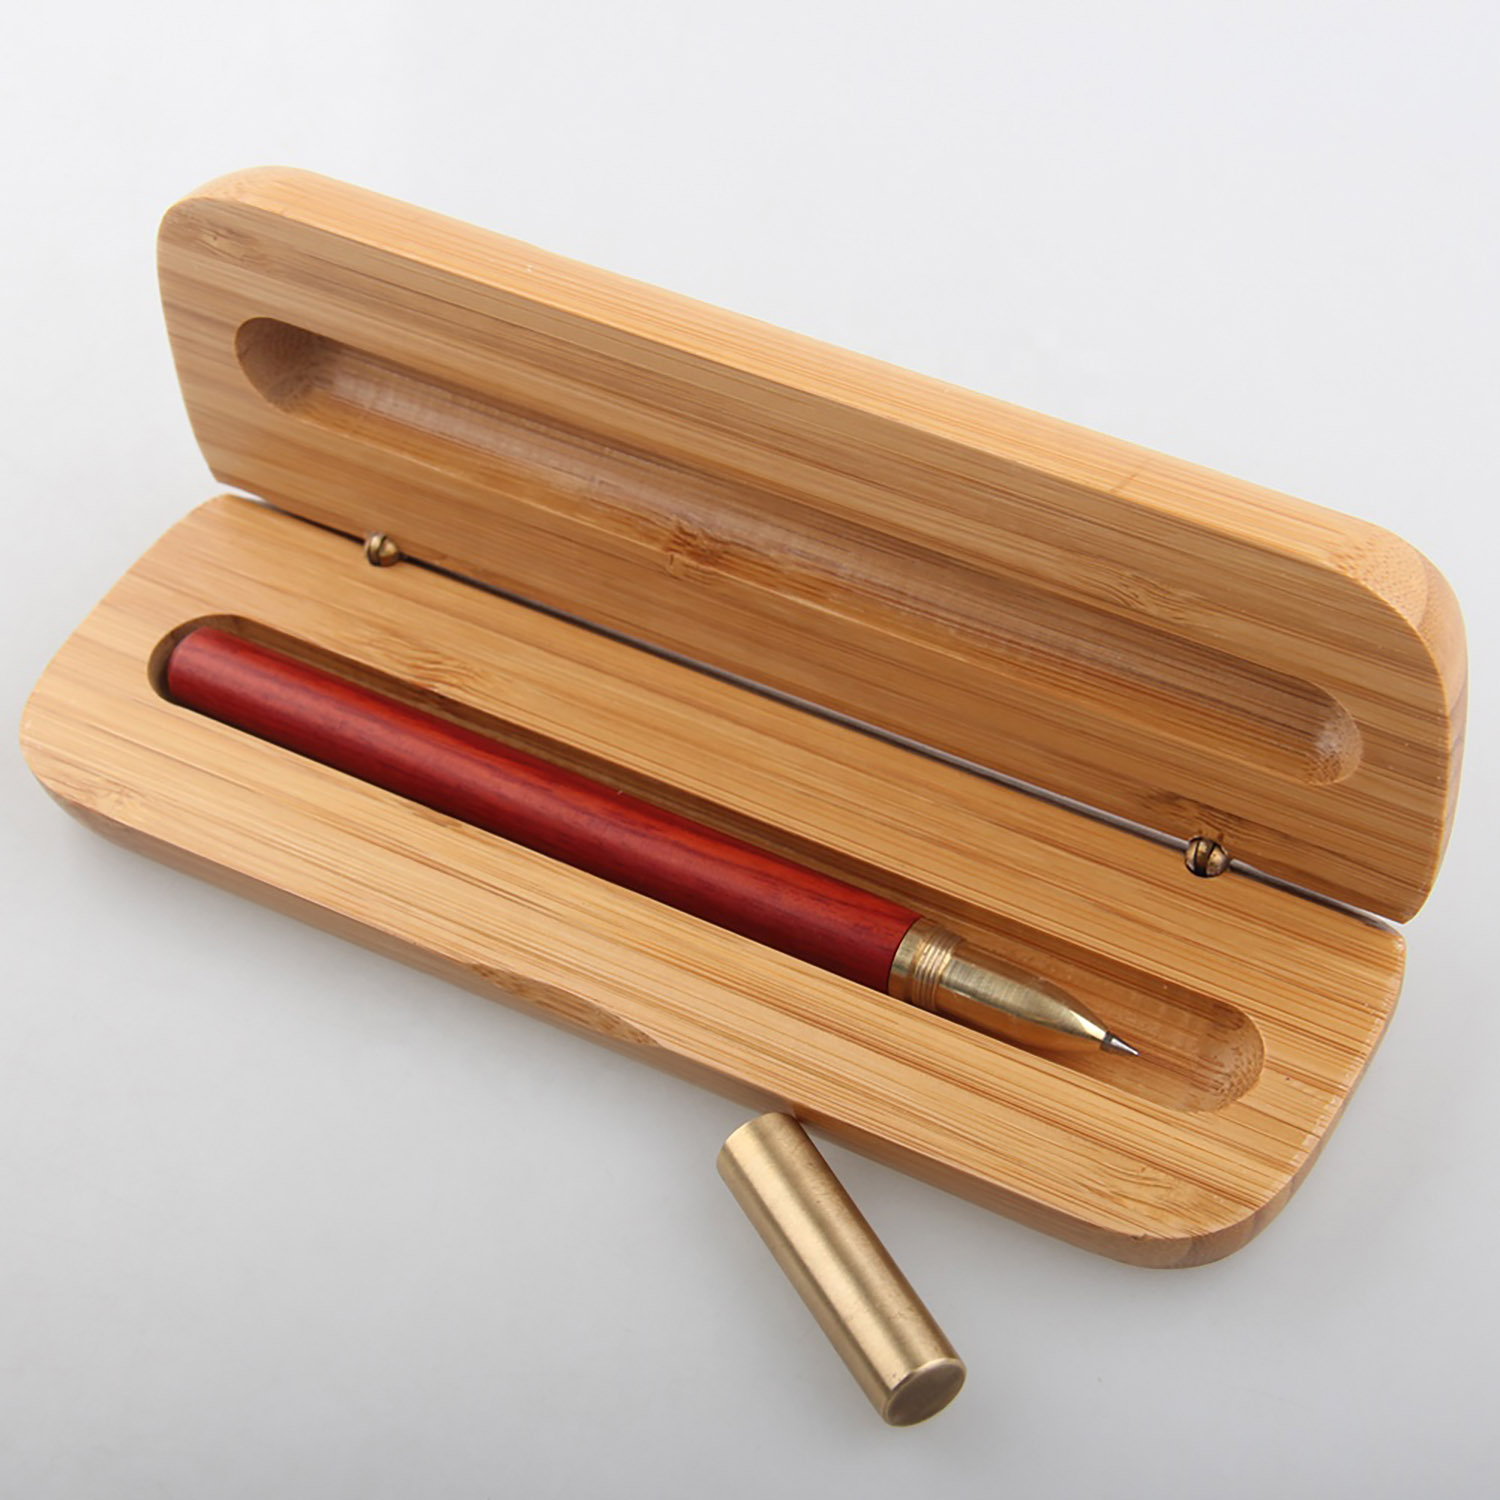 Example of wooden pen with bamboo box available to wholesale buyers